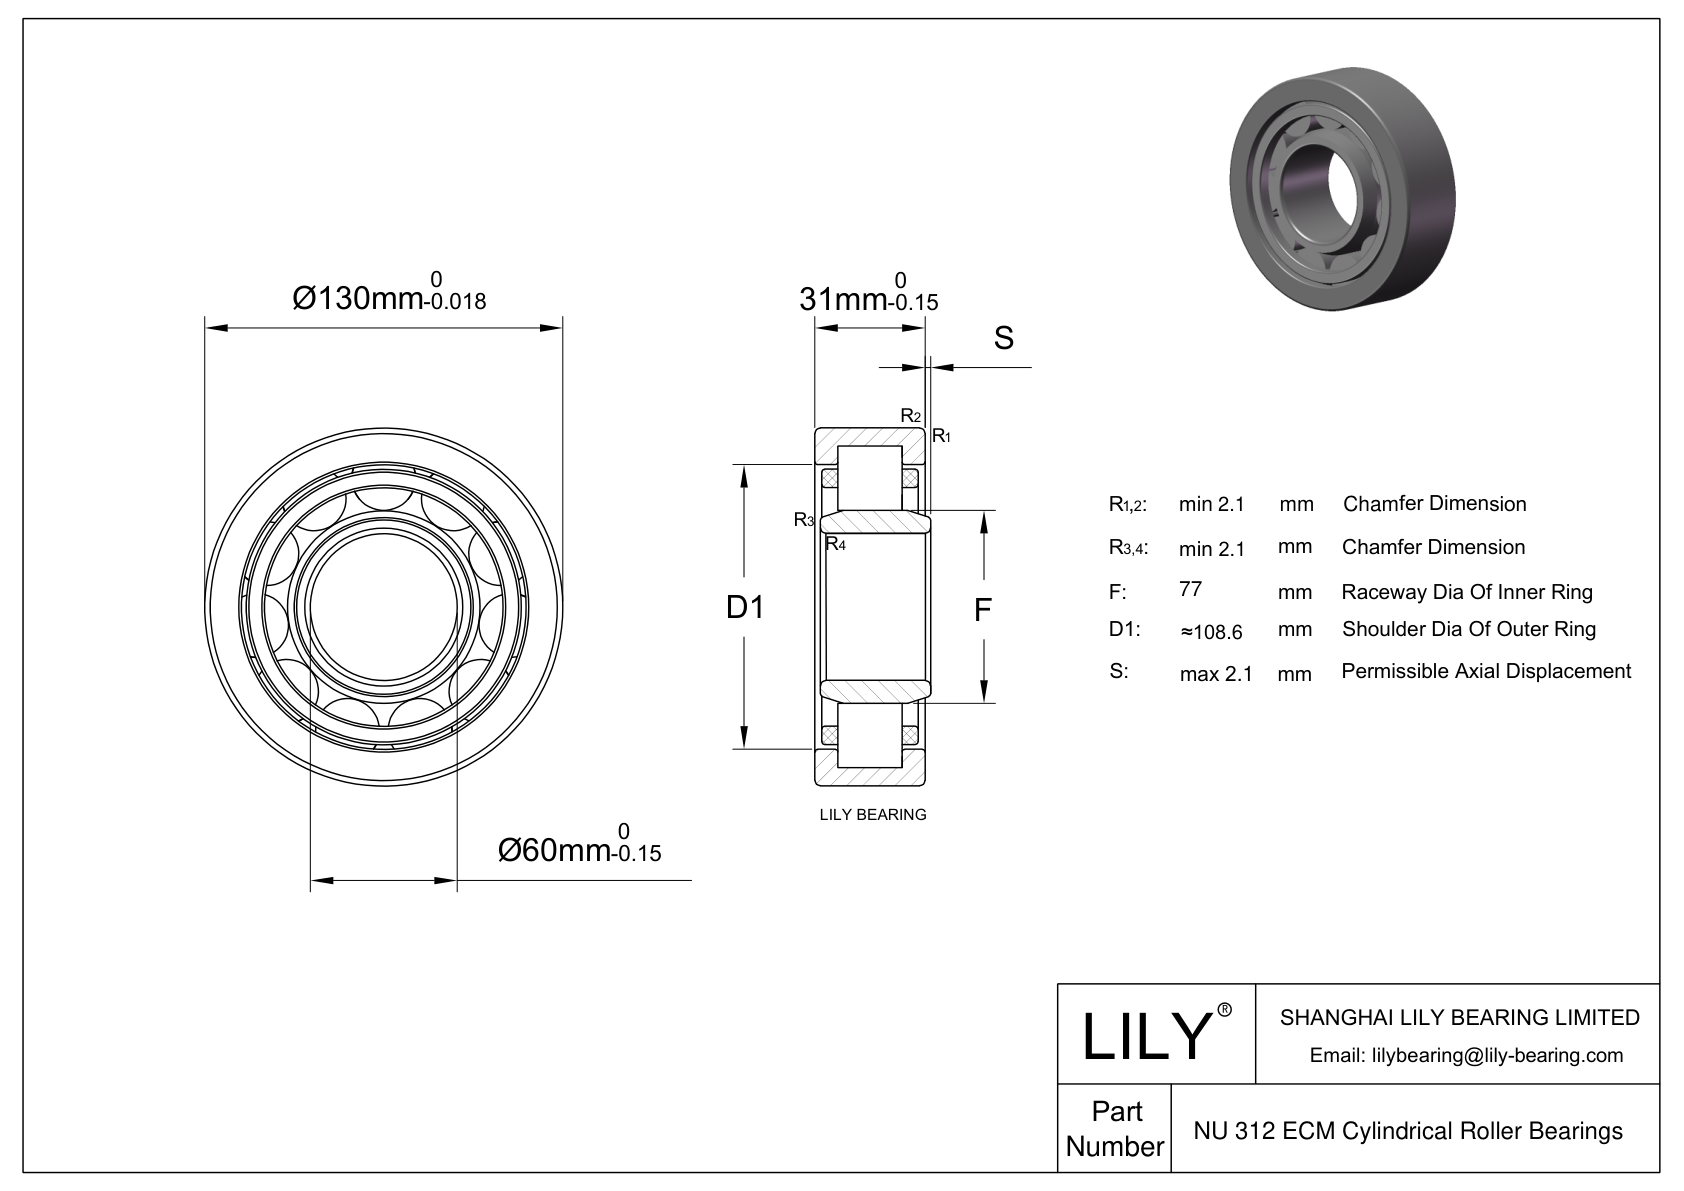 NU 312 ECM/C3VL0241 Ceramic Coated Cylindrical Roller Bearings cad drawing